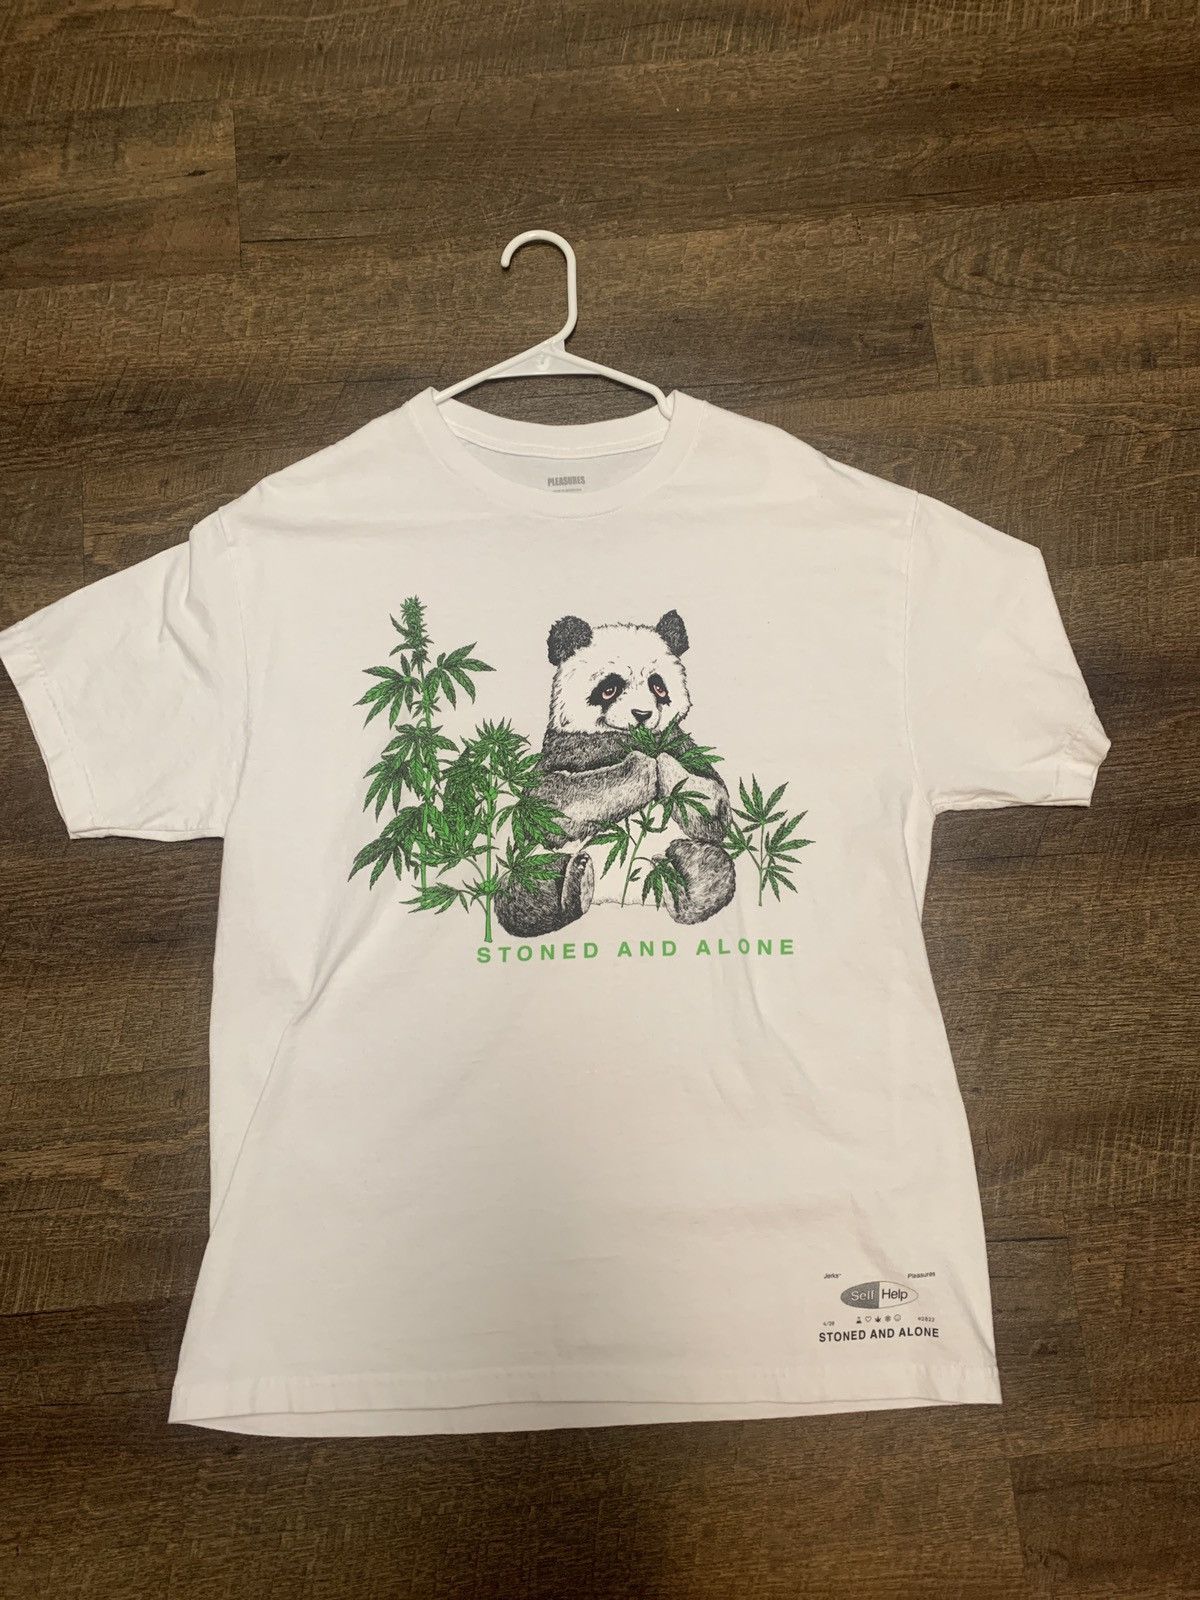 Pleasures Pleasures short sleeve “Stoned and Alone” Size US L / EU 52-54 / 3 - 2 Preview